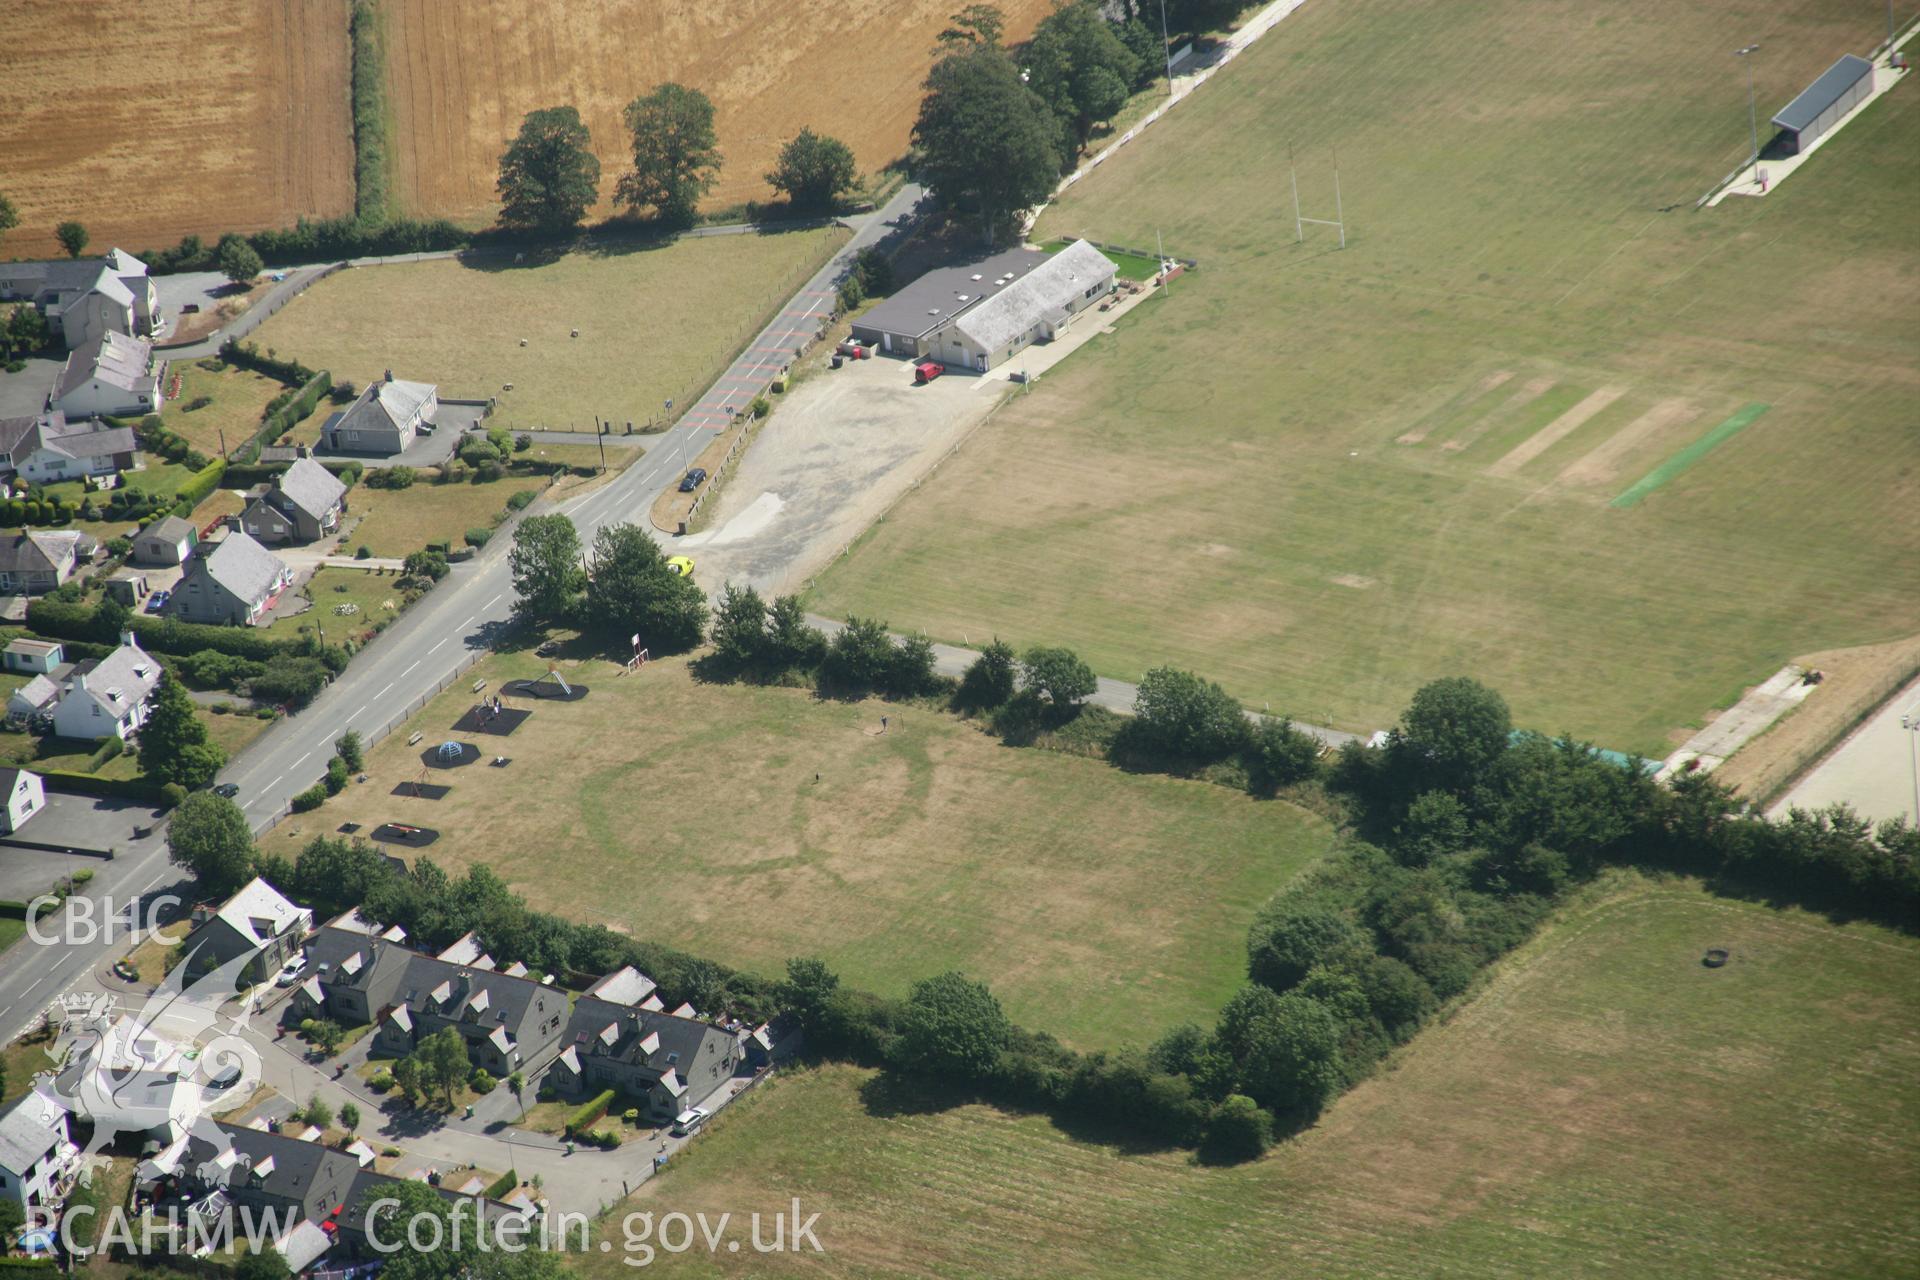 RCAHMW colour oblique aerial photograph of King George's Field Enclosure, viewed from the north-west. Taken on 03 August 2006 by Toby Driver